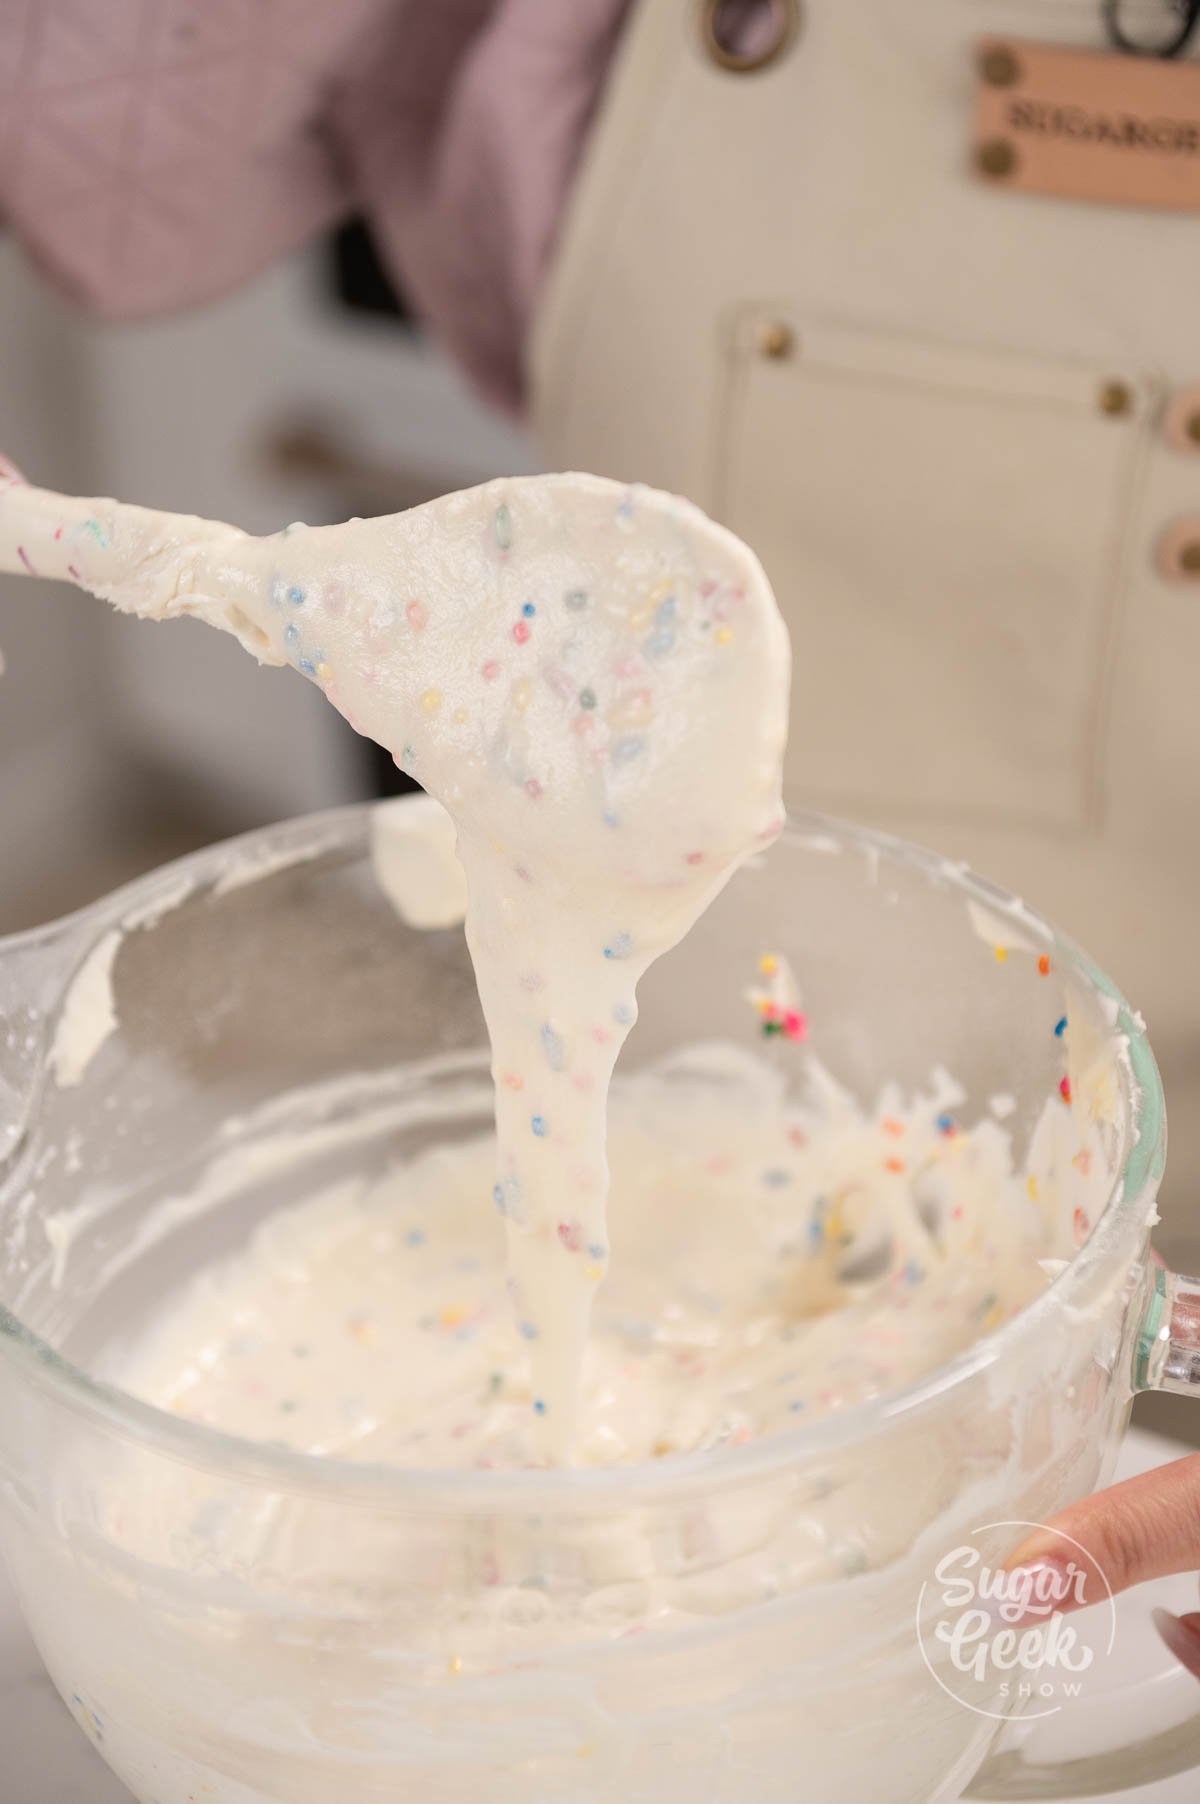 spatula being held above mixing bowl covered in cake batter with sprinkles